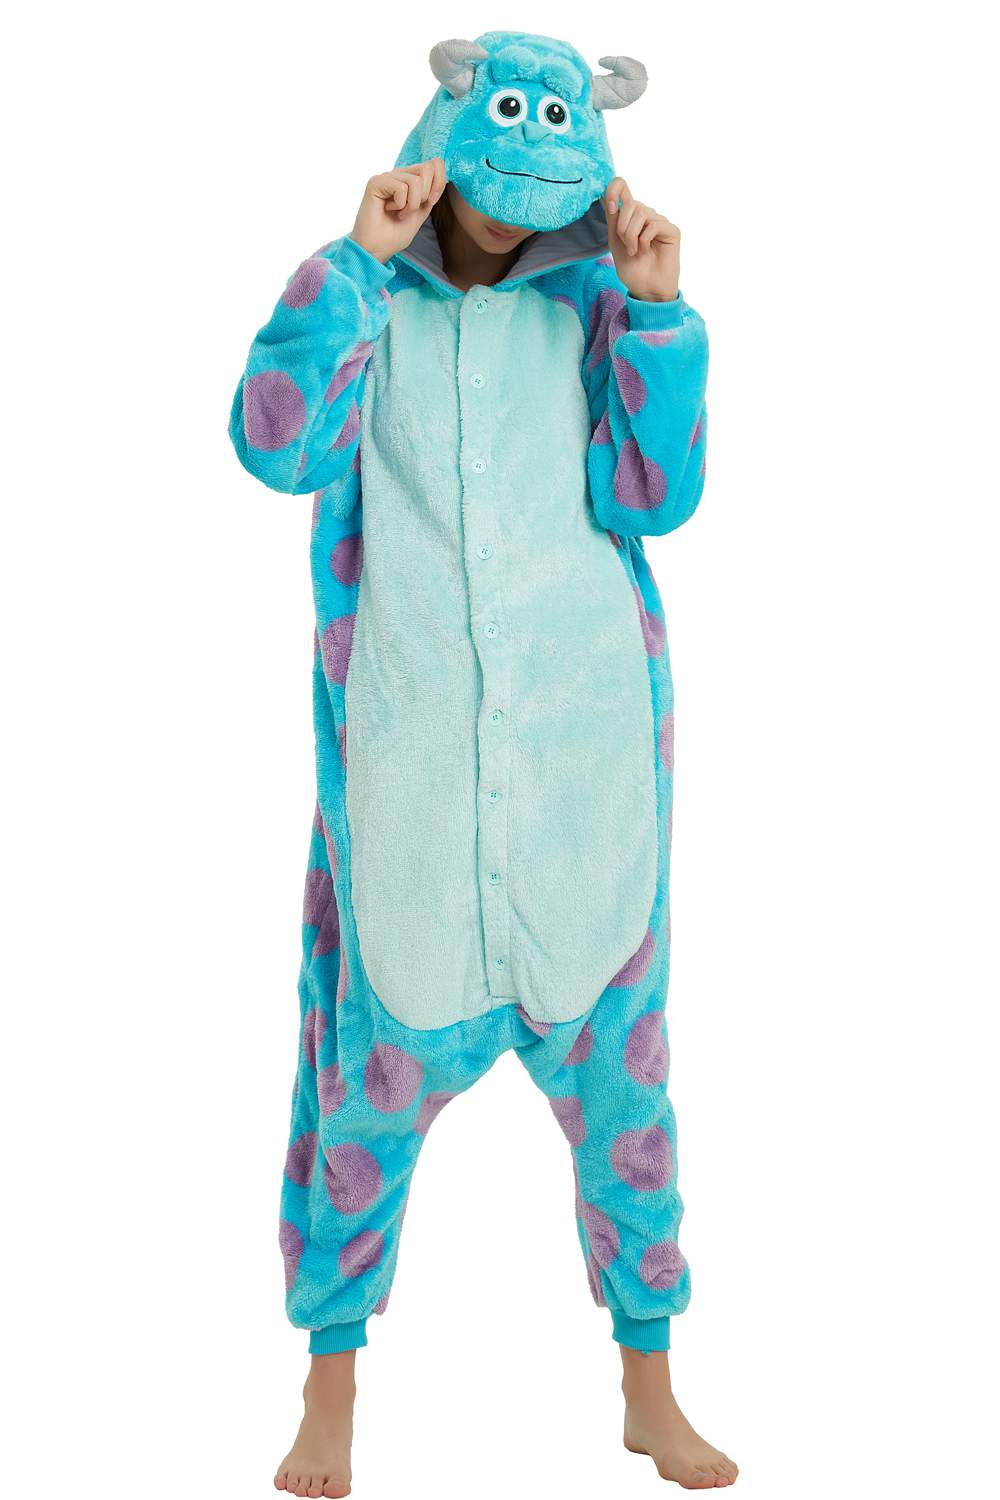 Monster Inc. Sulley Animal Onesie For Adults and Teenagers